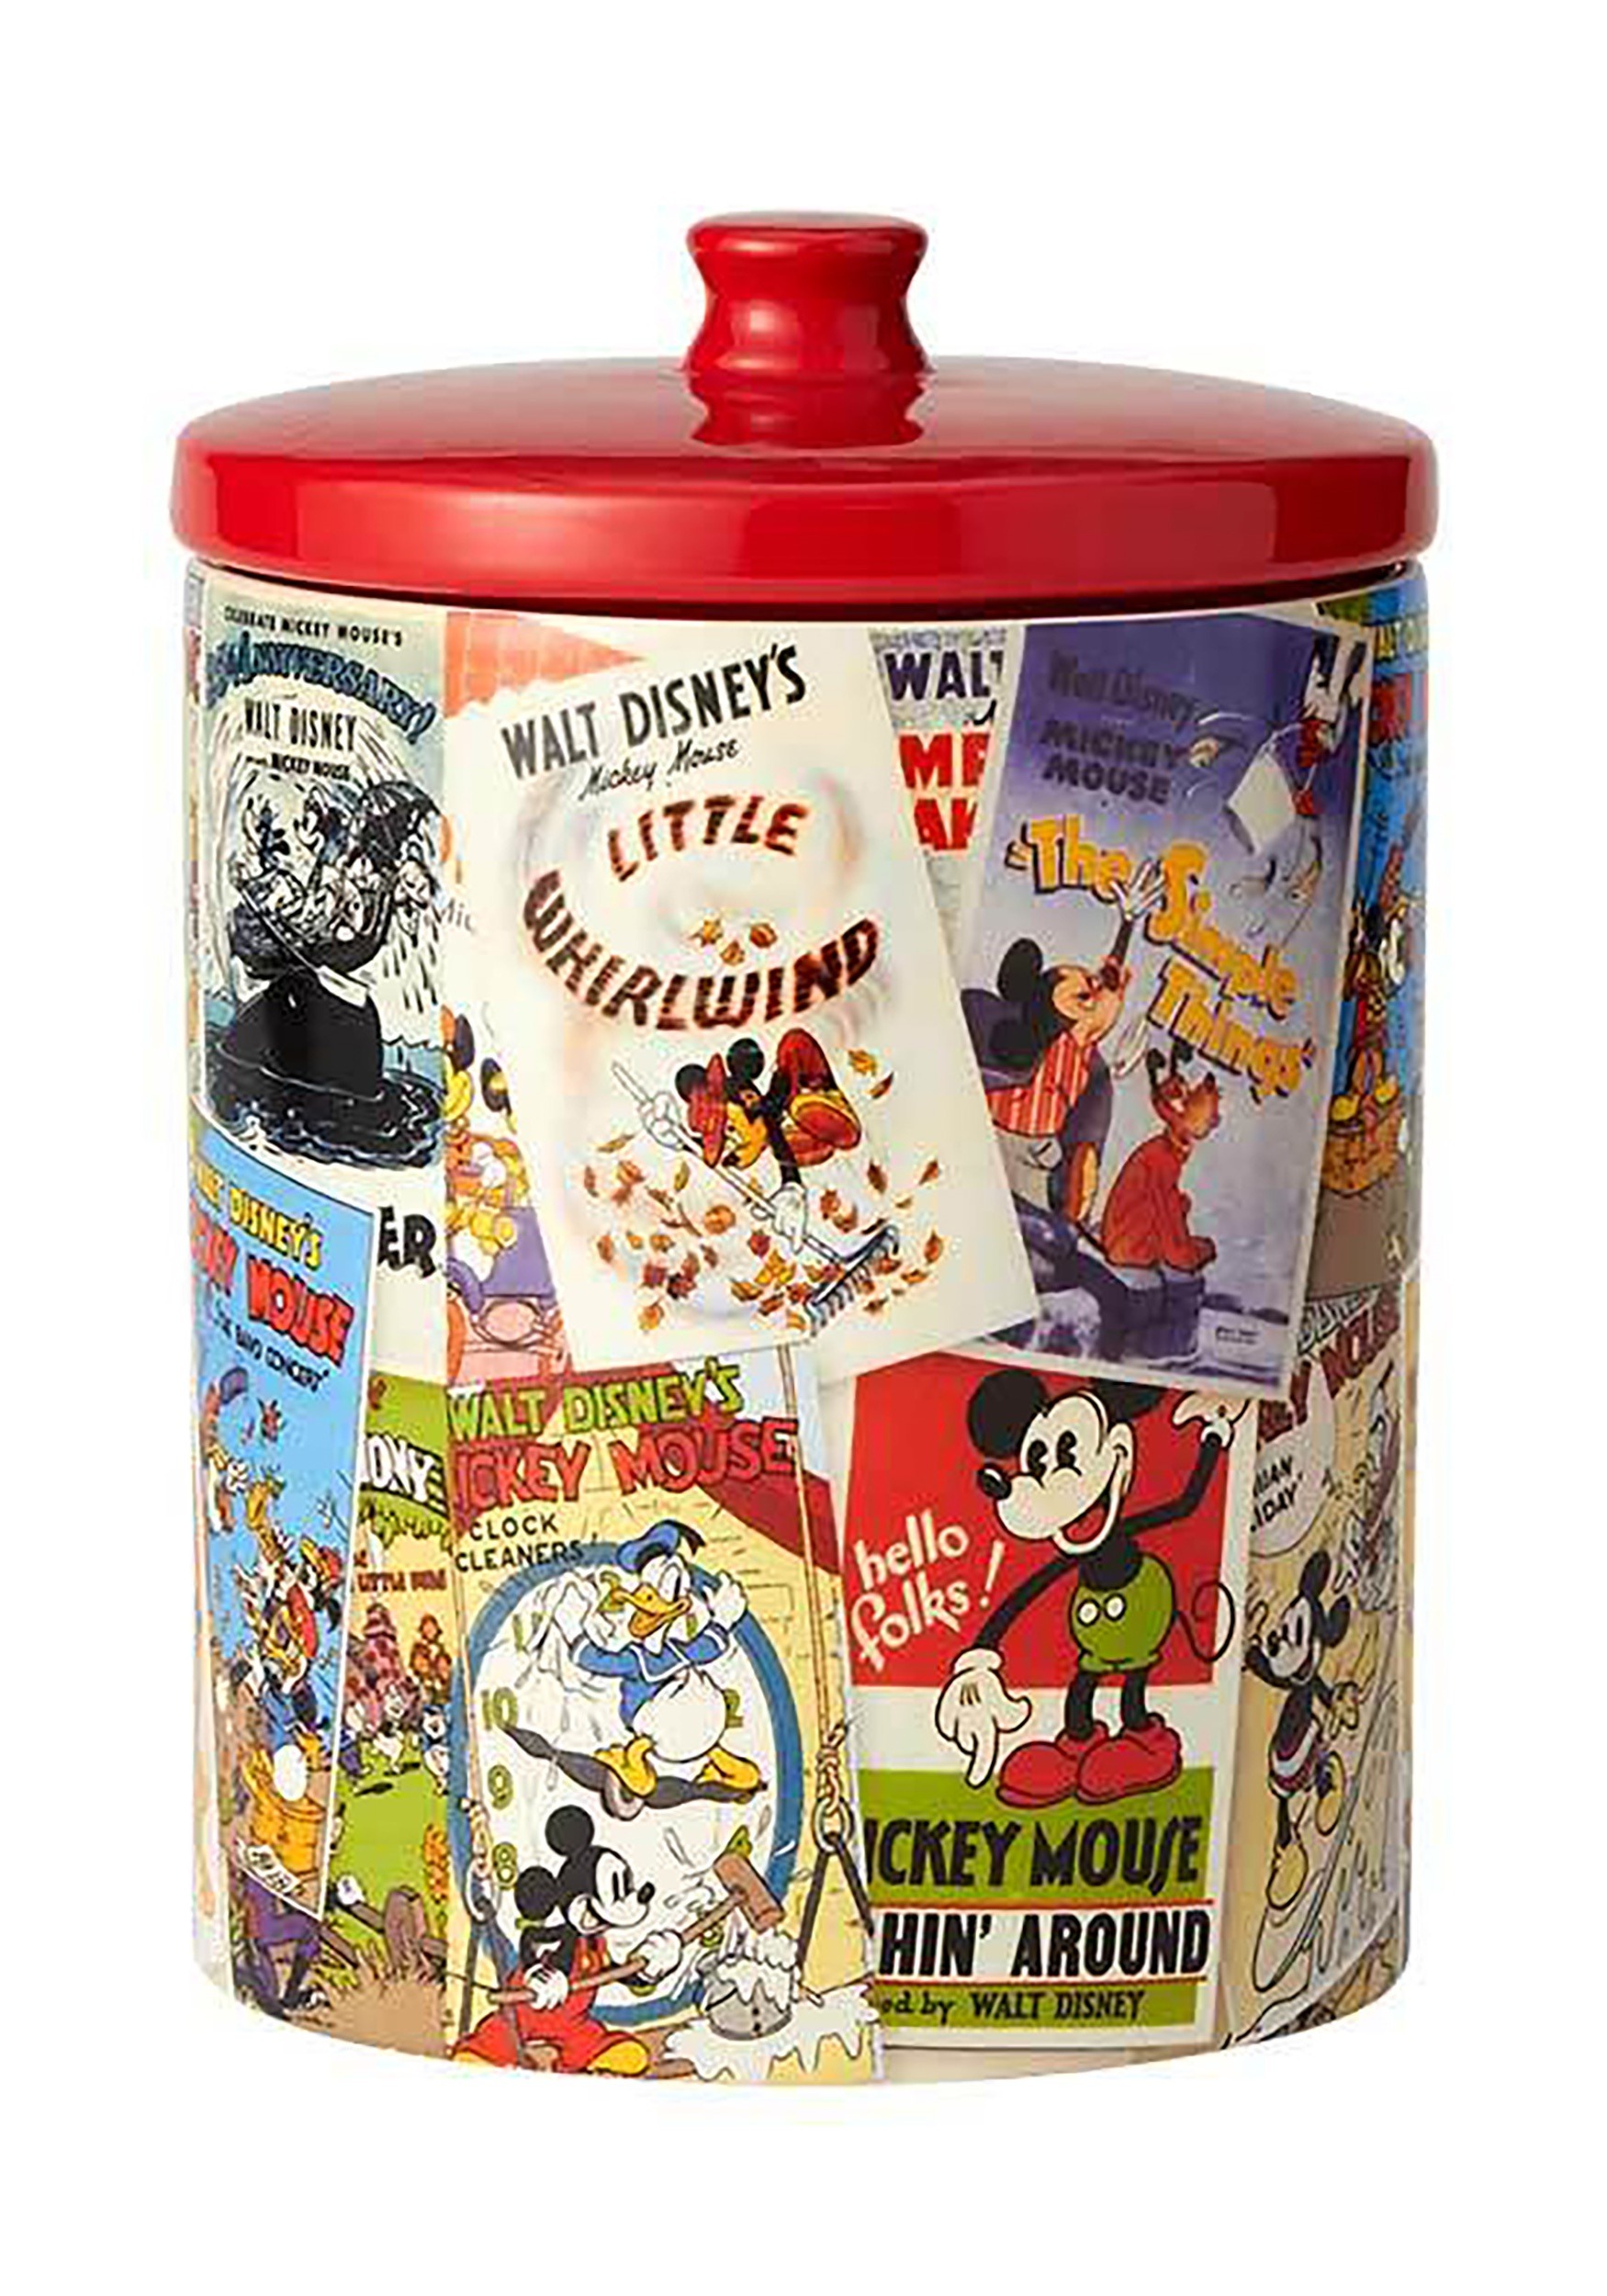 https://images.fun.com/products/49297/1-1/mickey-mouse-ceramic-cookie-jar.jpg